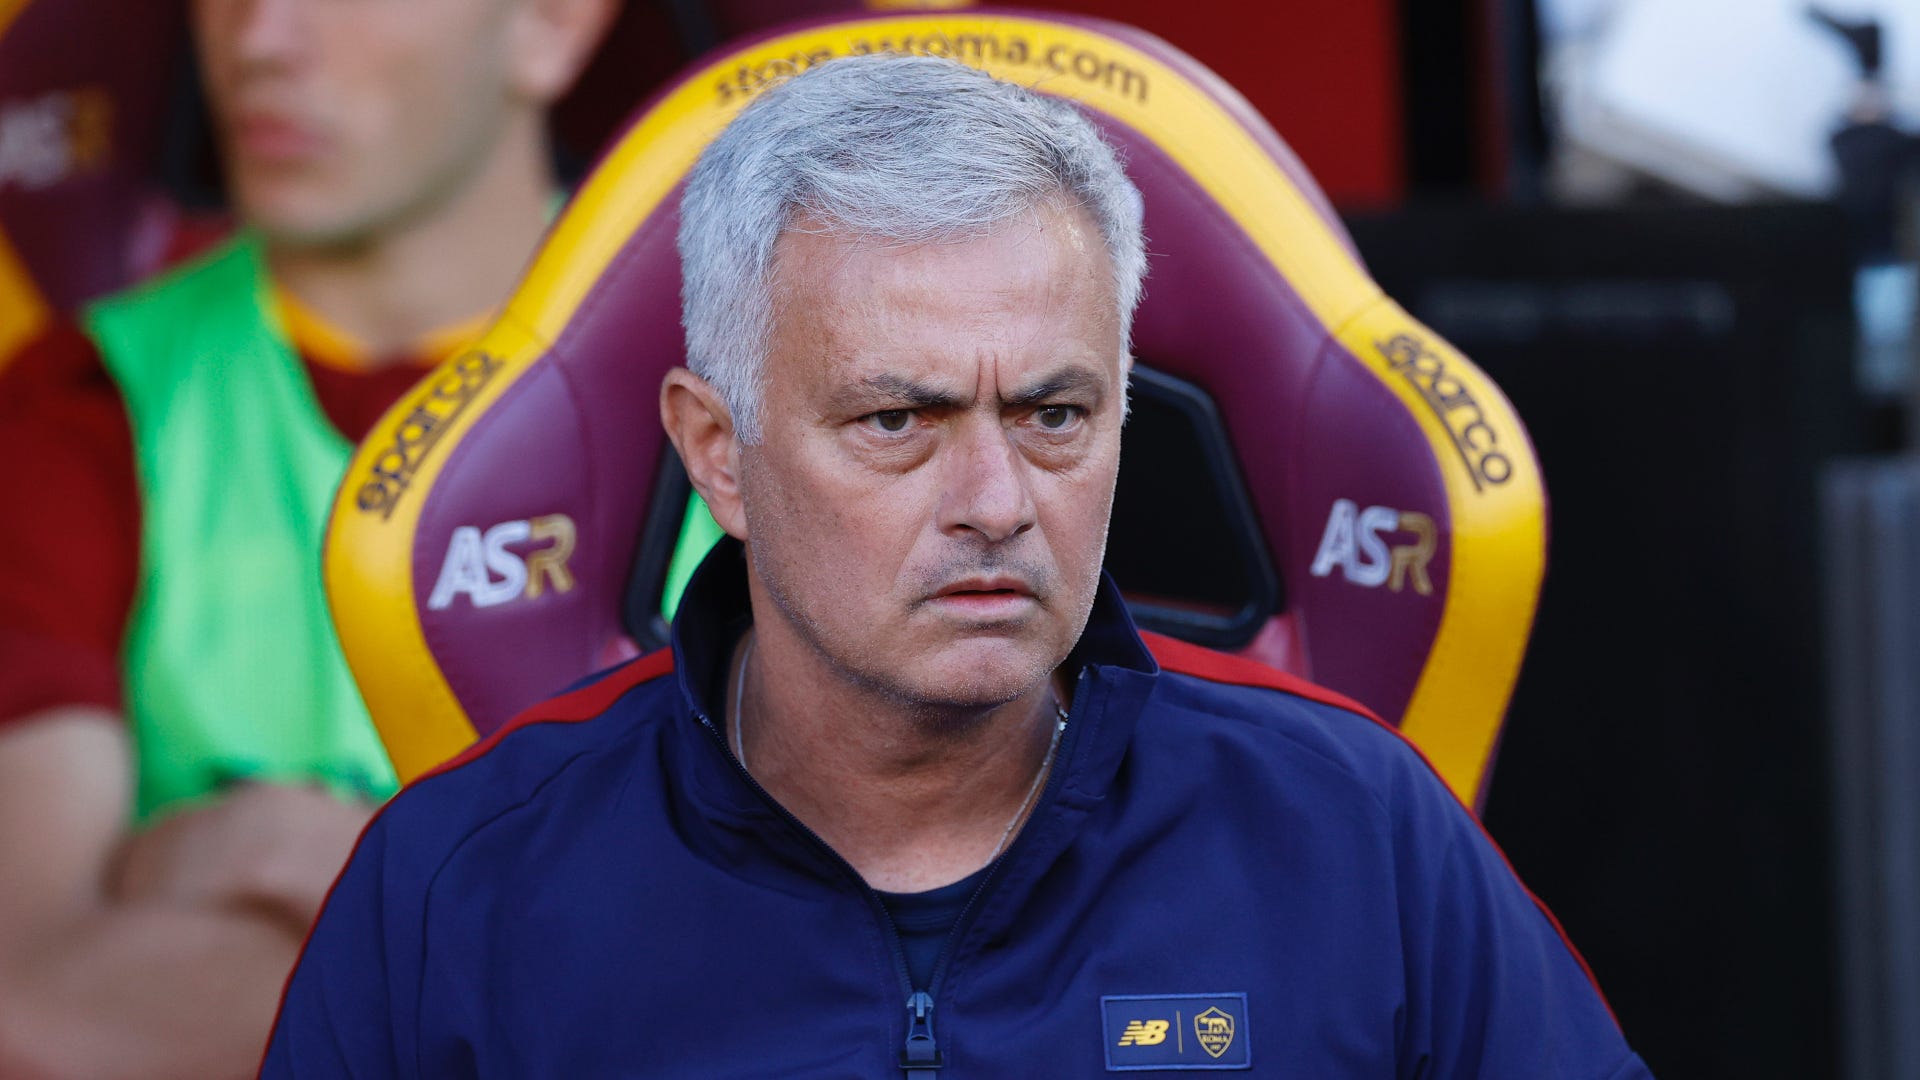 Jose Mourinho snubbed! Ex-Chelsea star Wayne Bridge reveals best manager he’s played under – and it’s not the Special One | Goal.com US